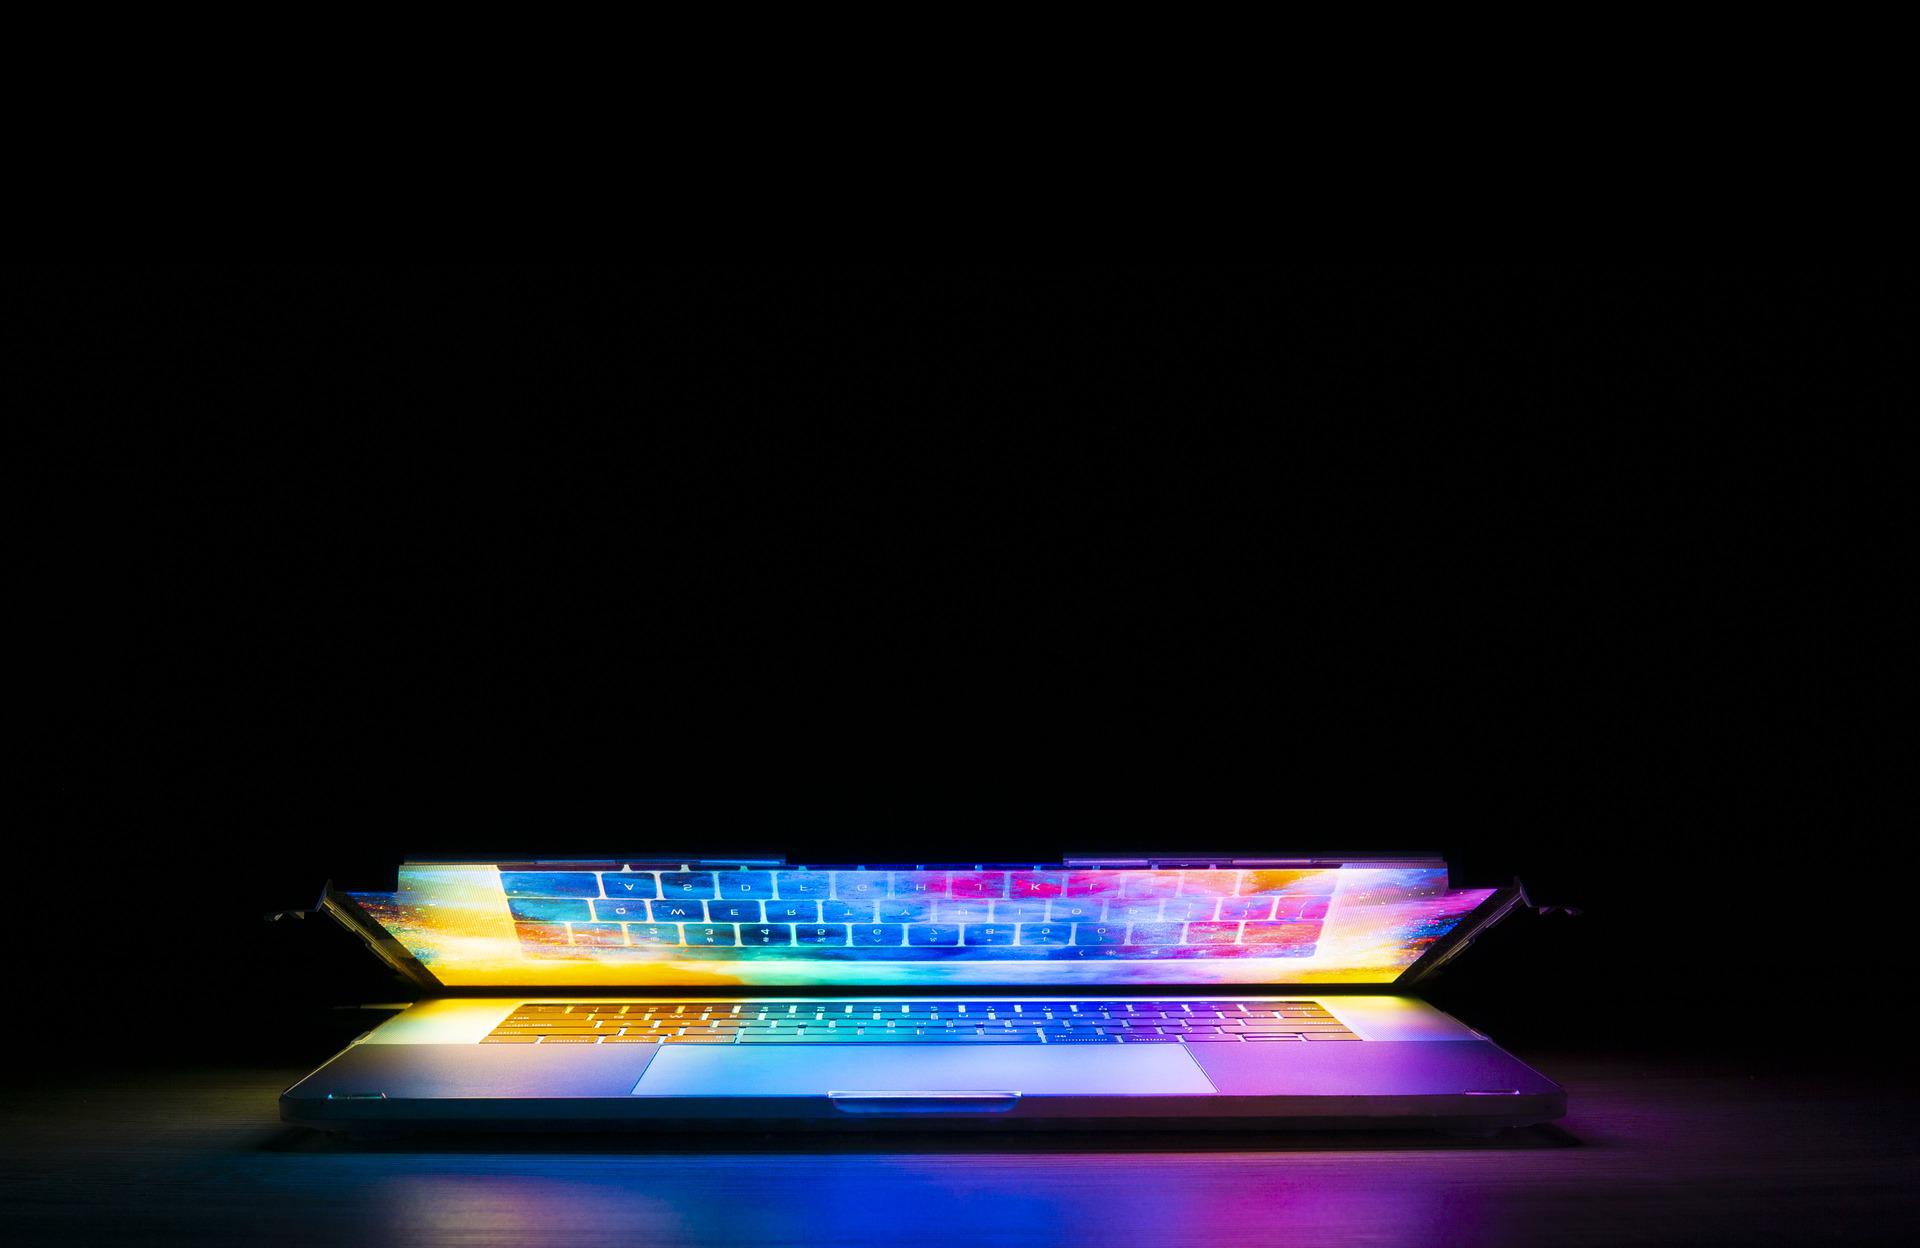 A partially closed laptop with a screen glowing different colors.